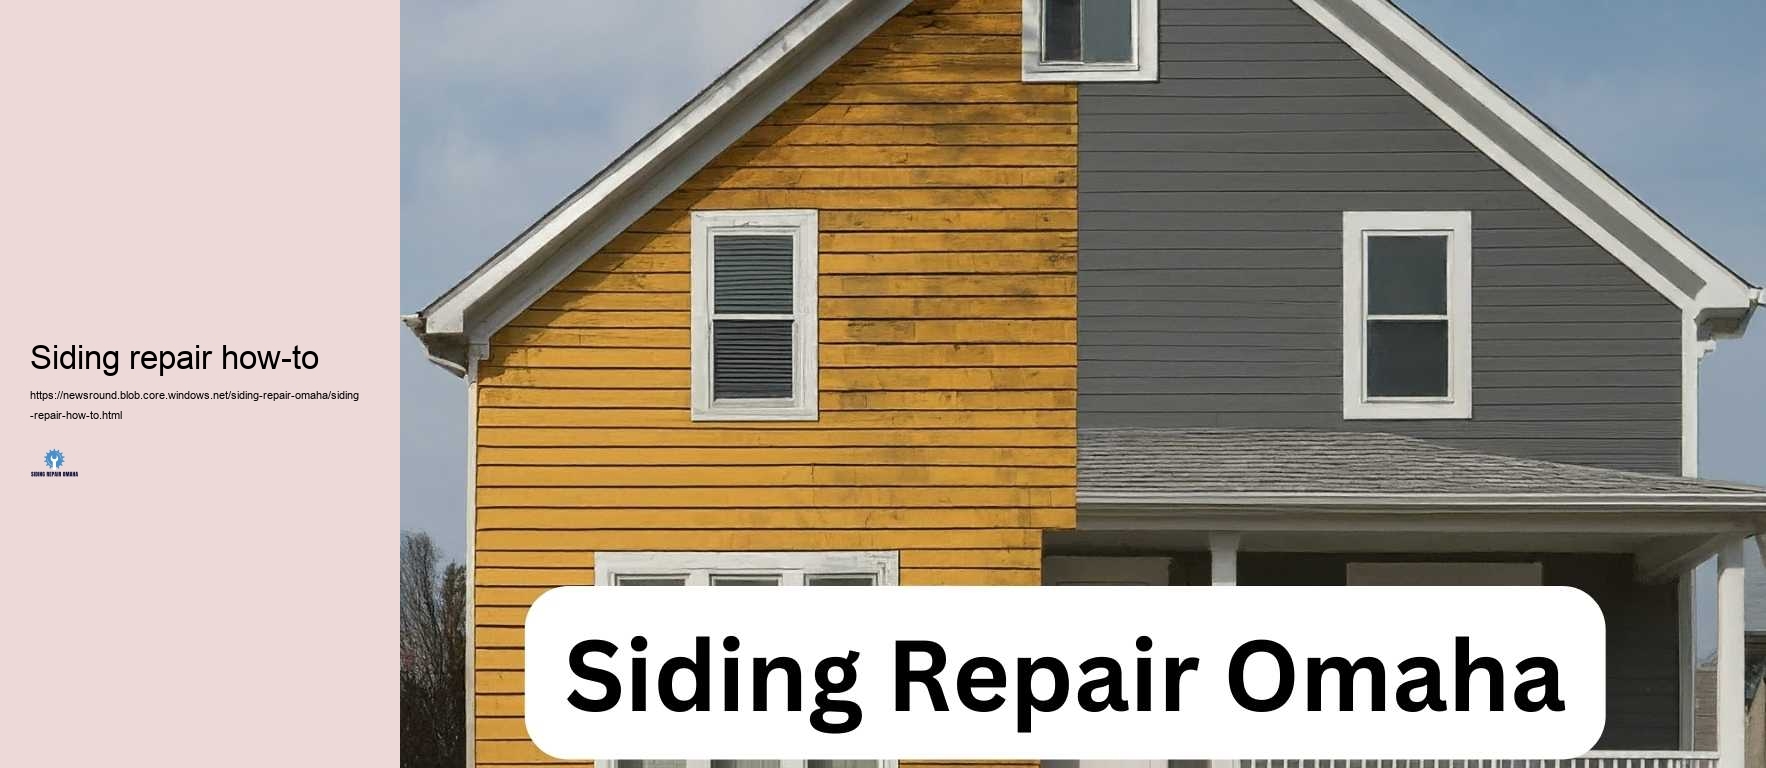 Siding repair how-to